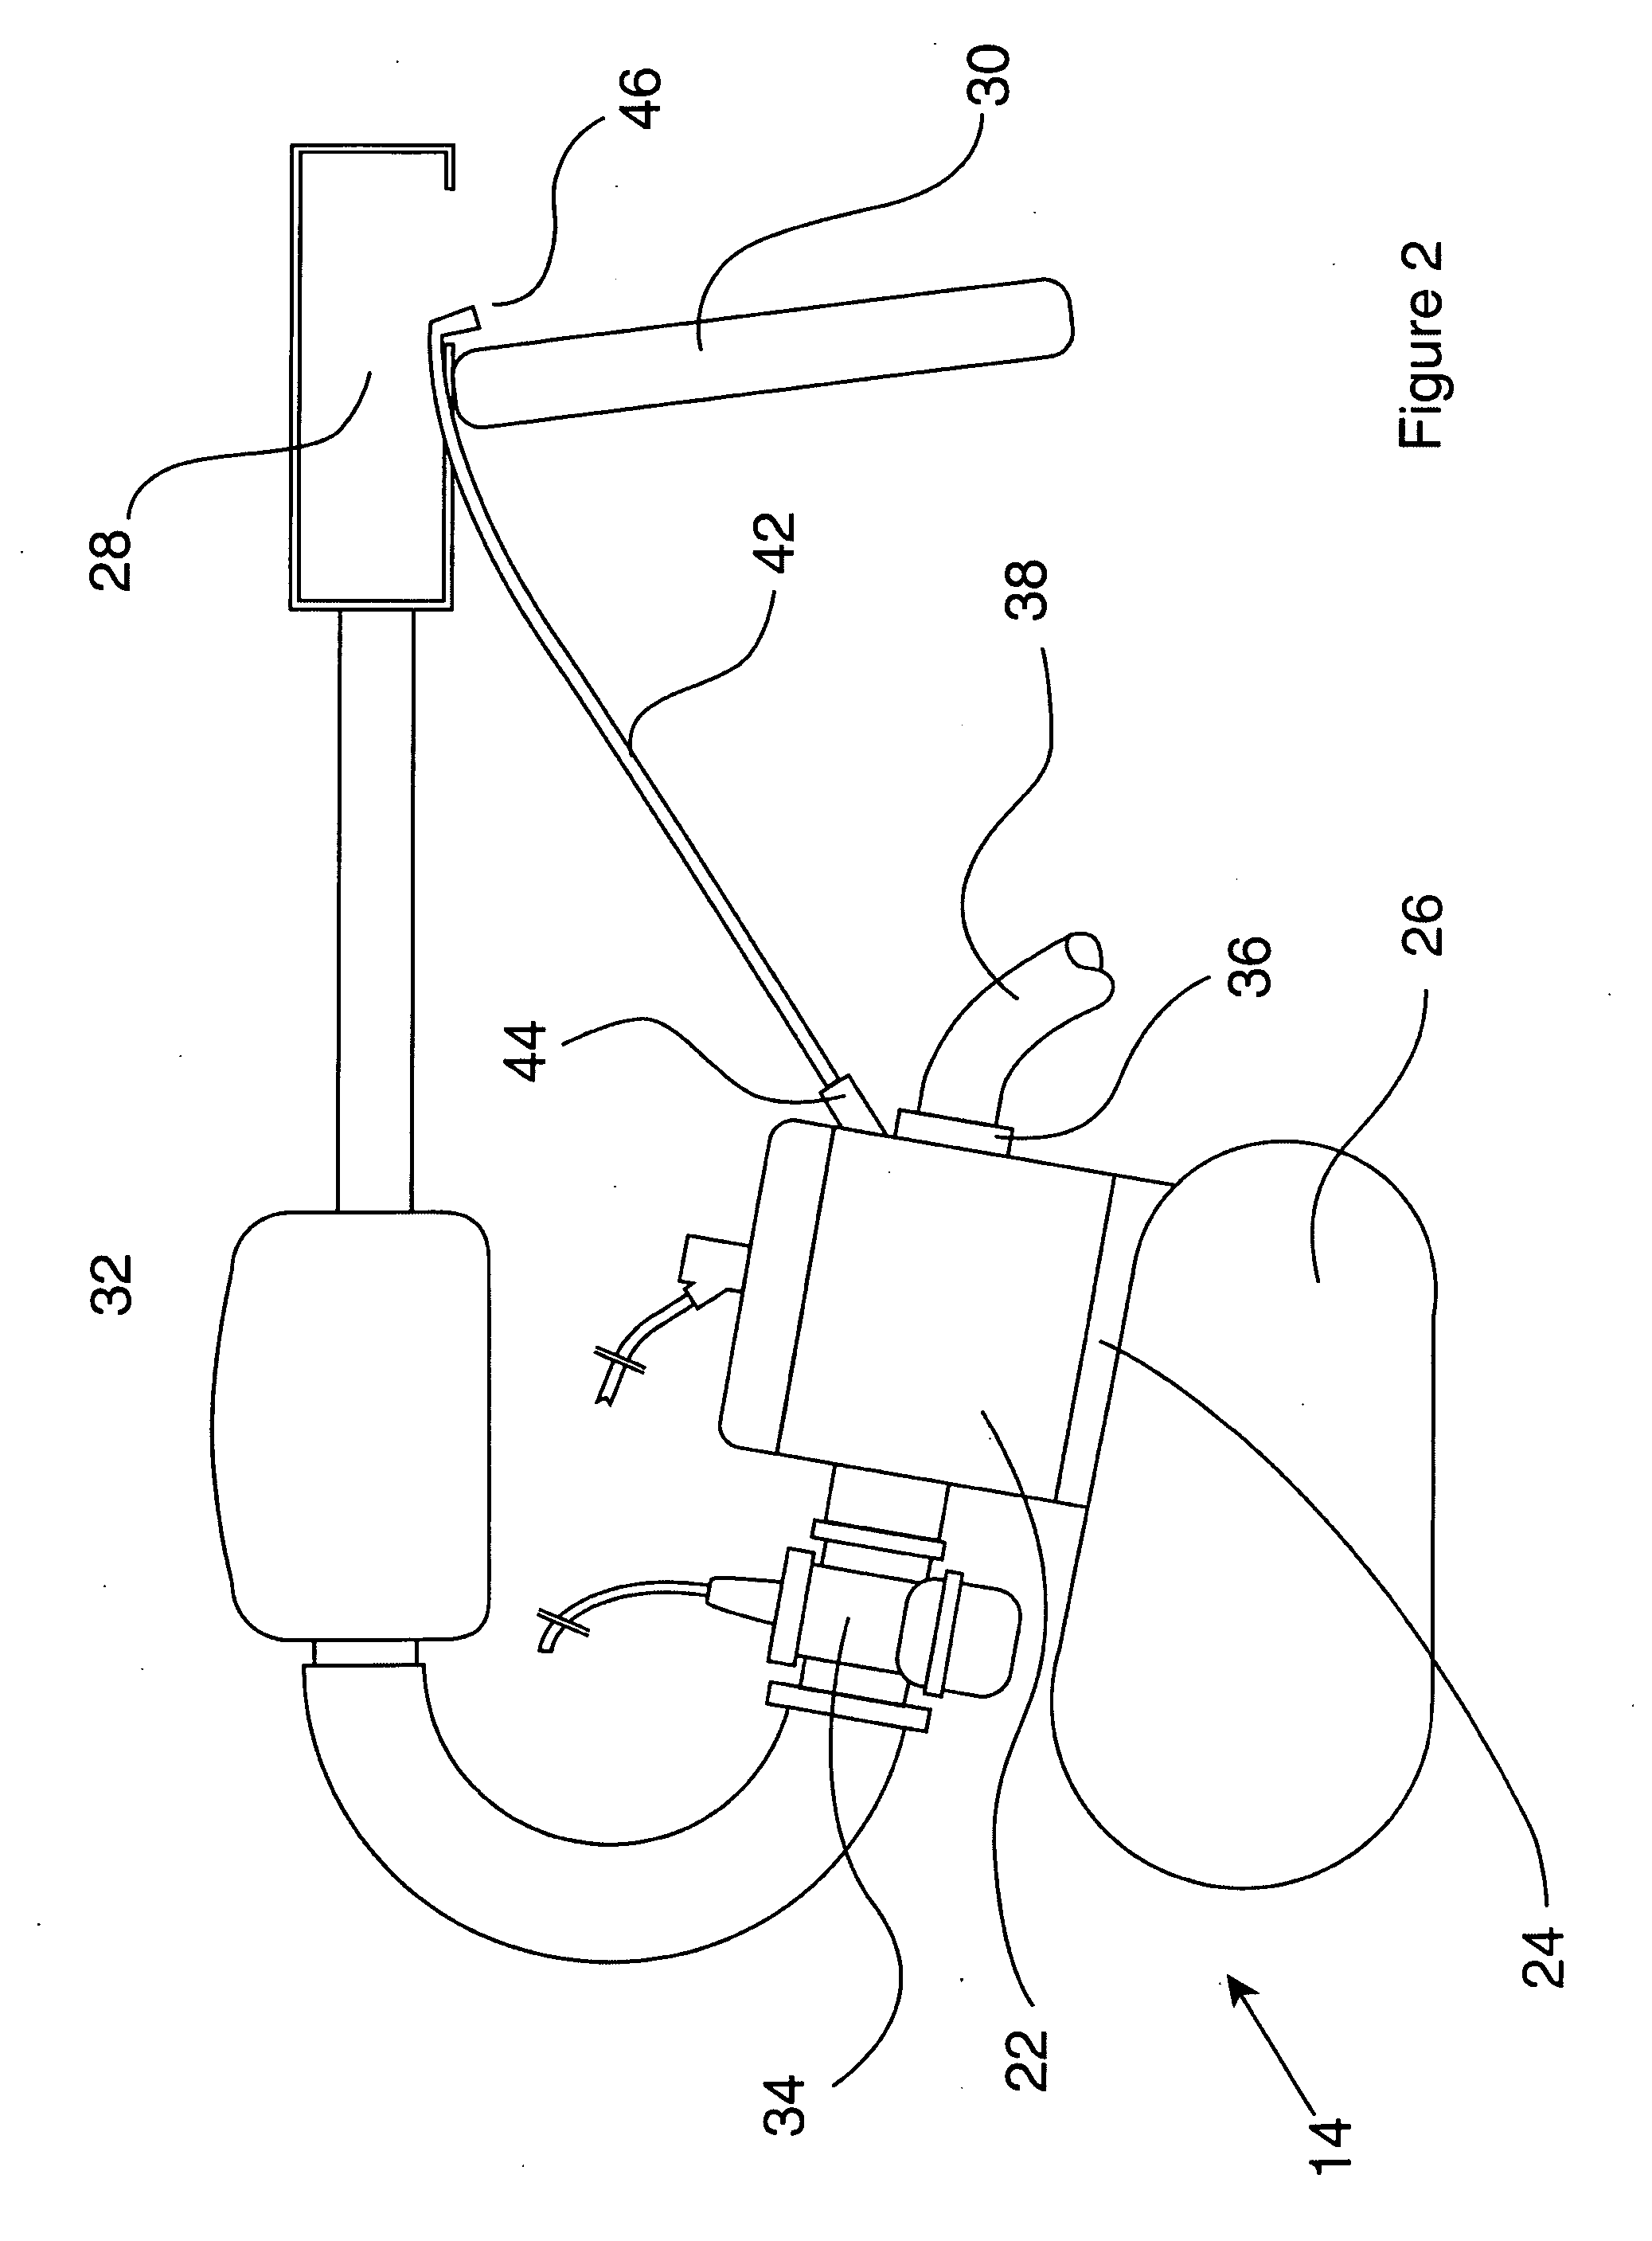 Secondary air supply system for internal combustion engine